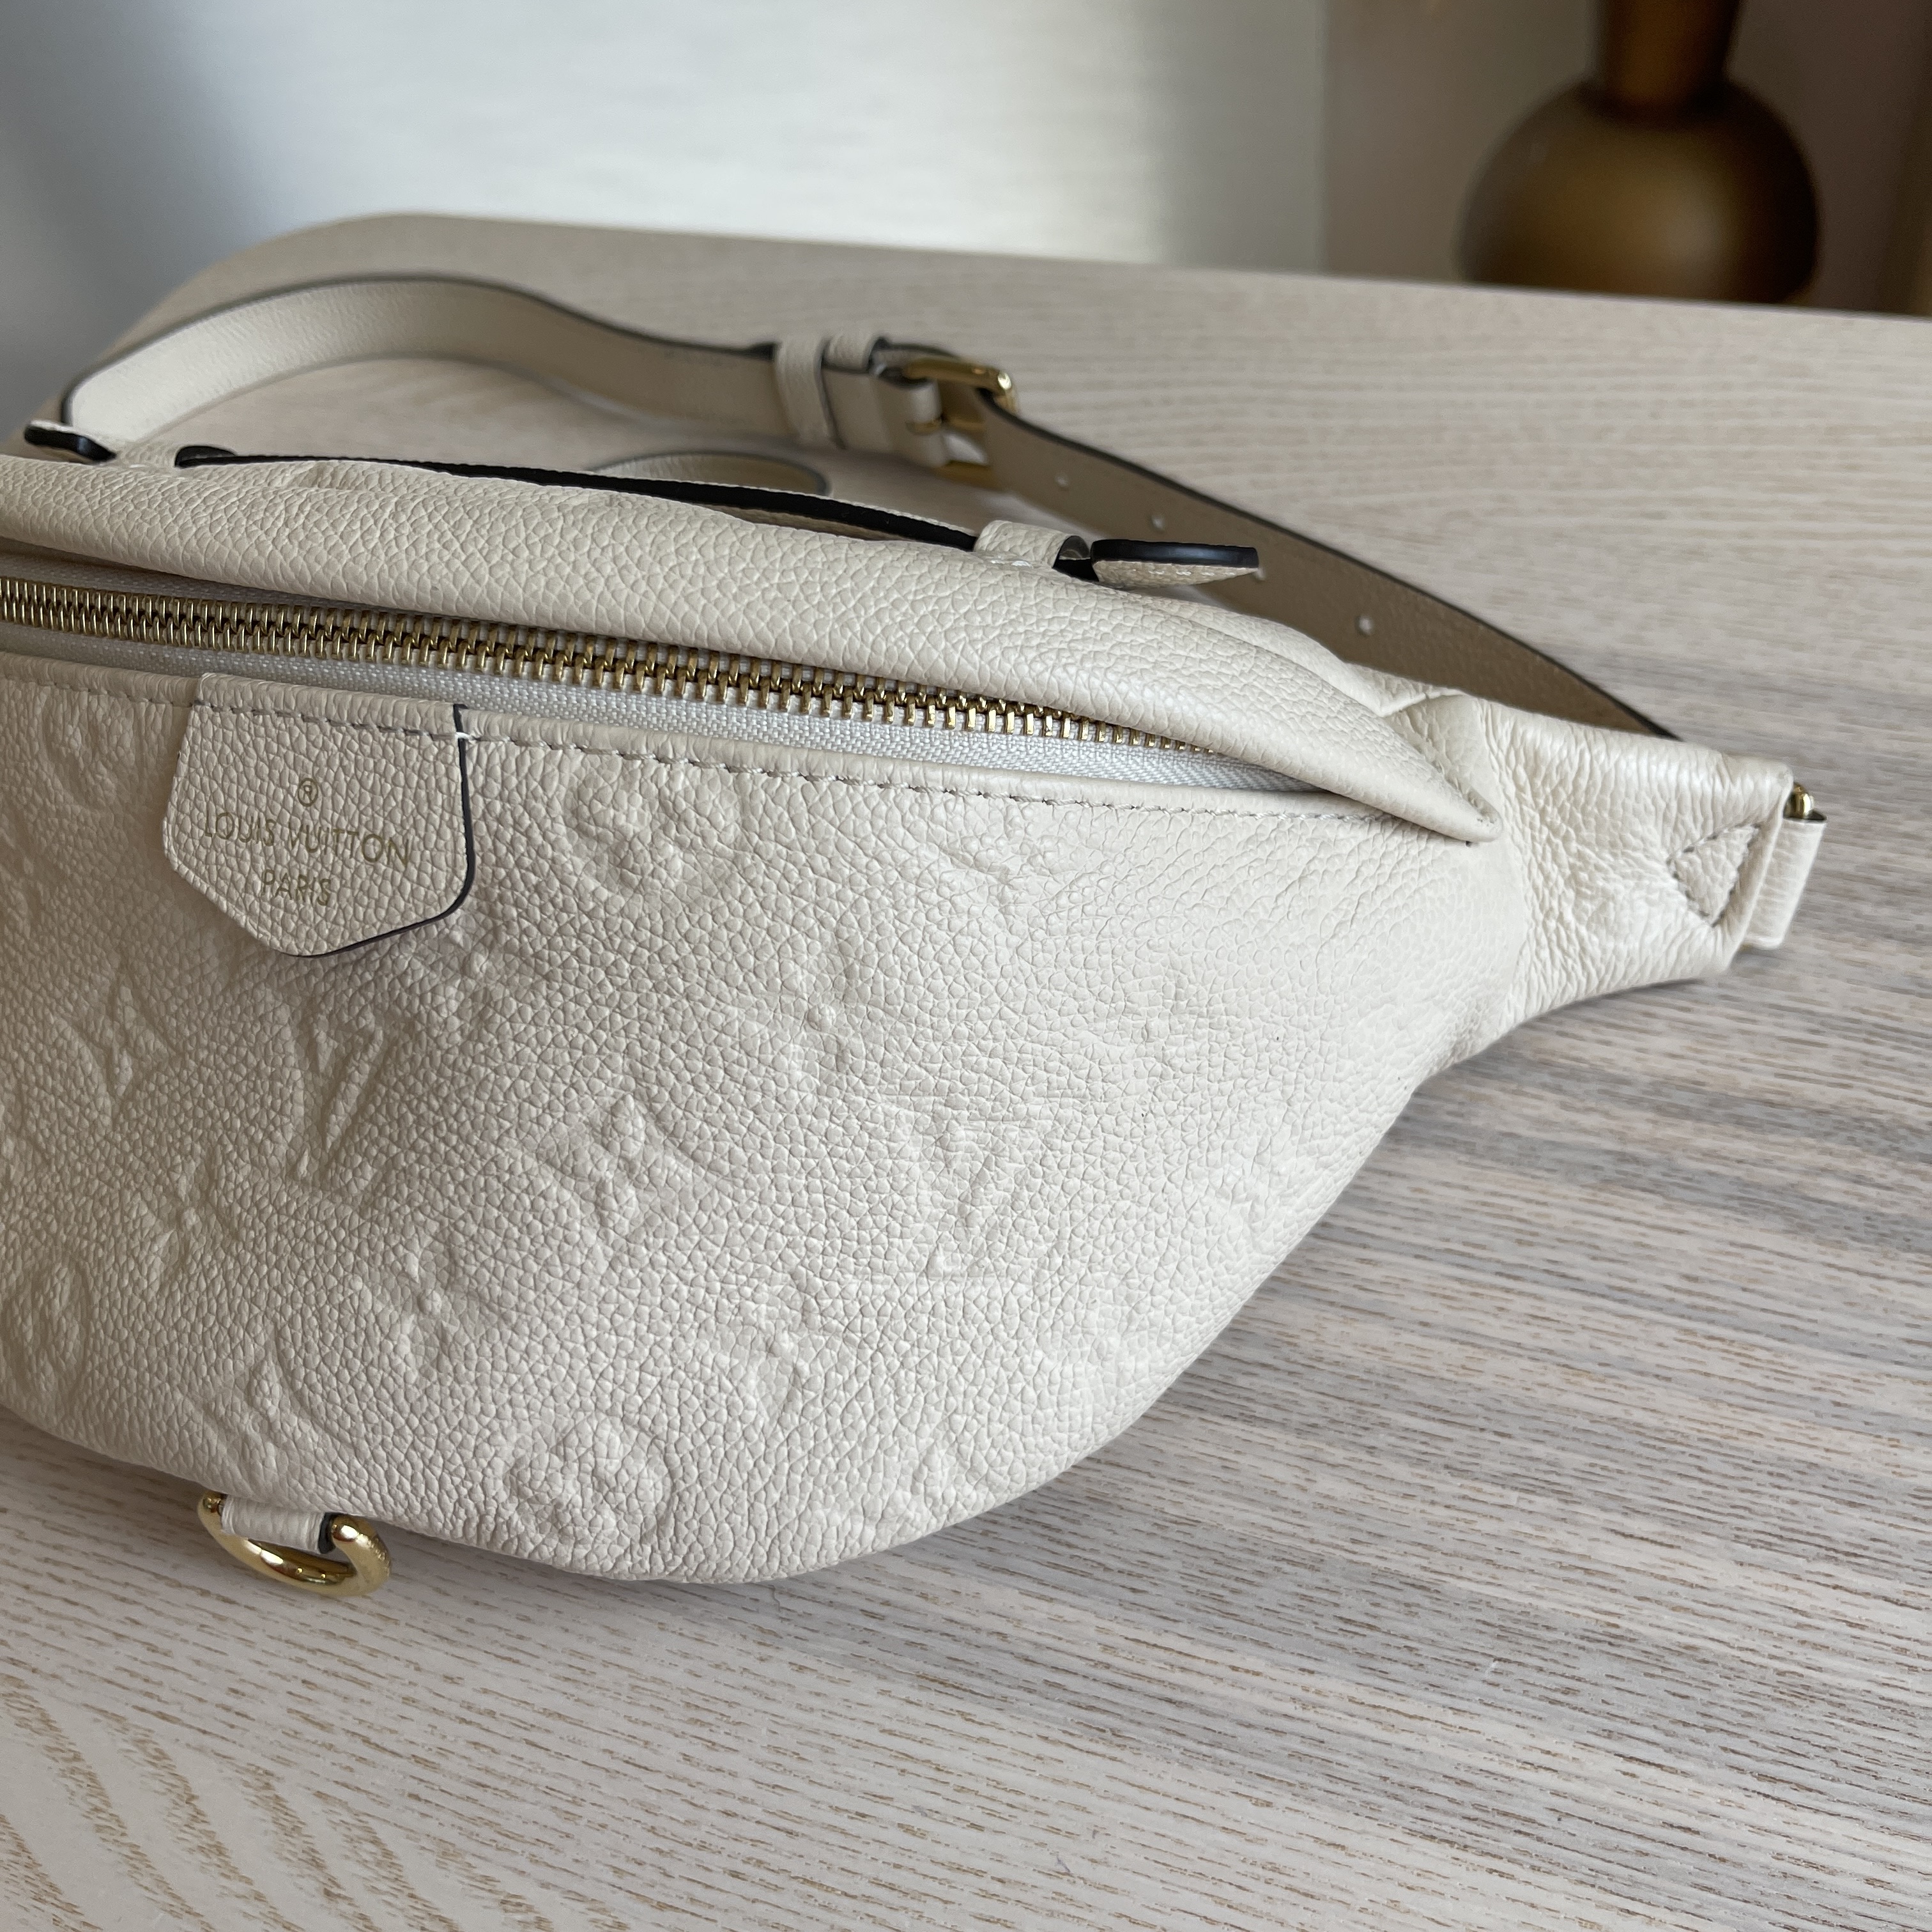 Monogram Empreinte Creme bumbag…Was this one quickly discontinued or only a  limited number produced? Can't even find it preloved : r/Louisvuitton